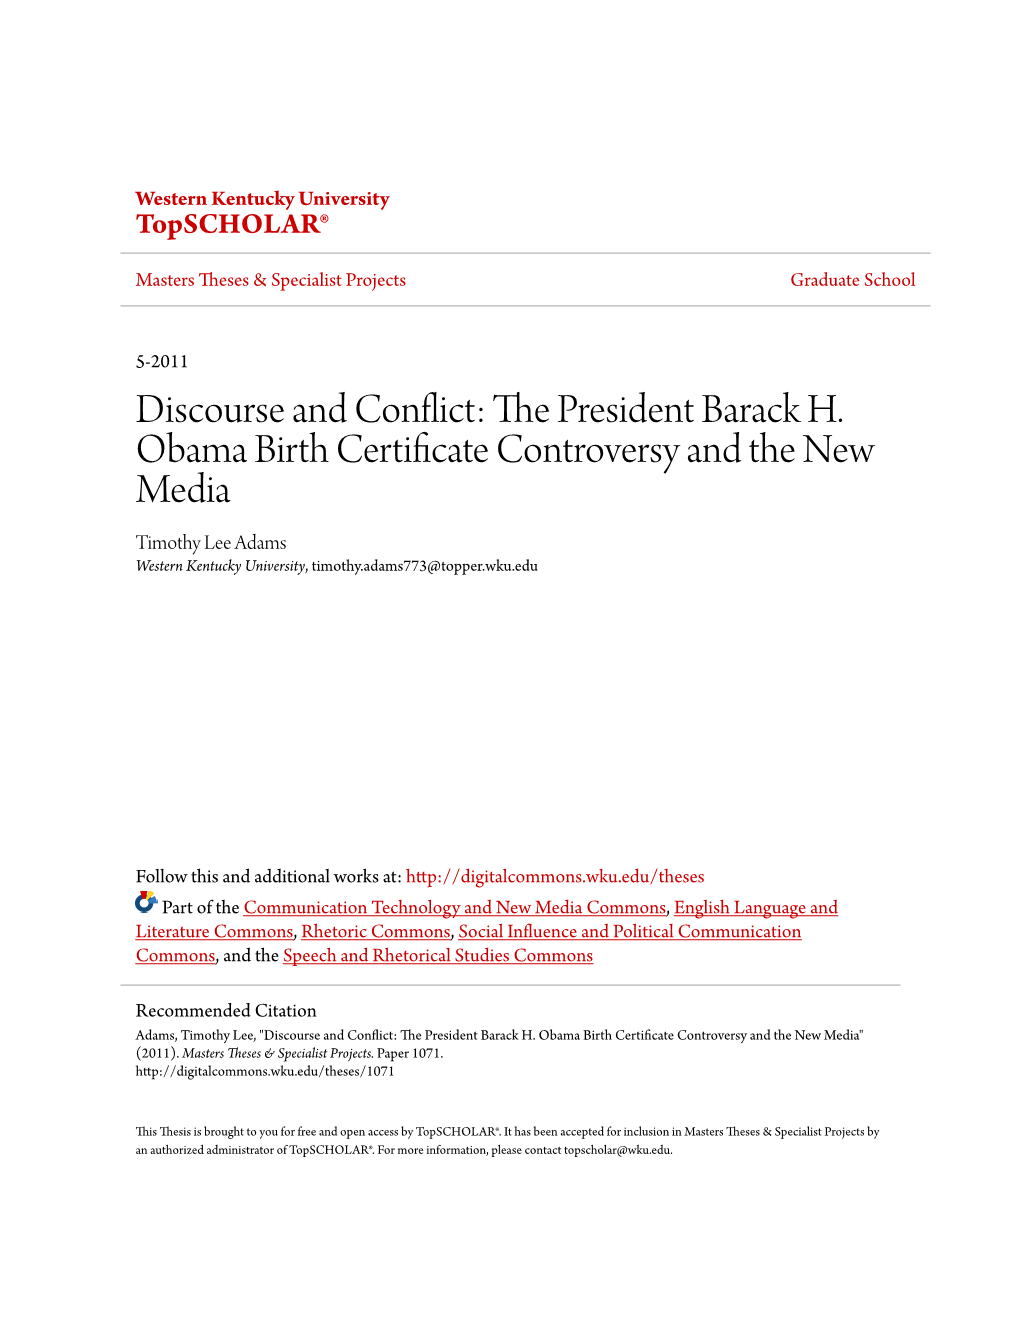 The President Barack H. Obama Birth Certificate Controversy and the New Media